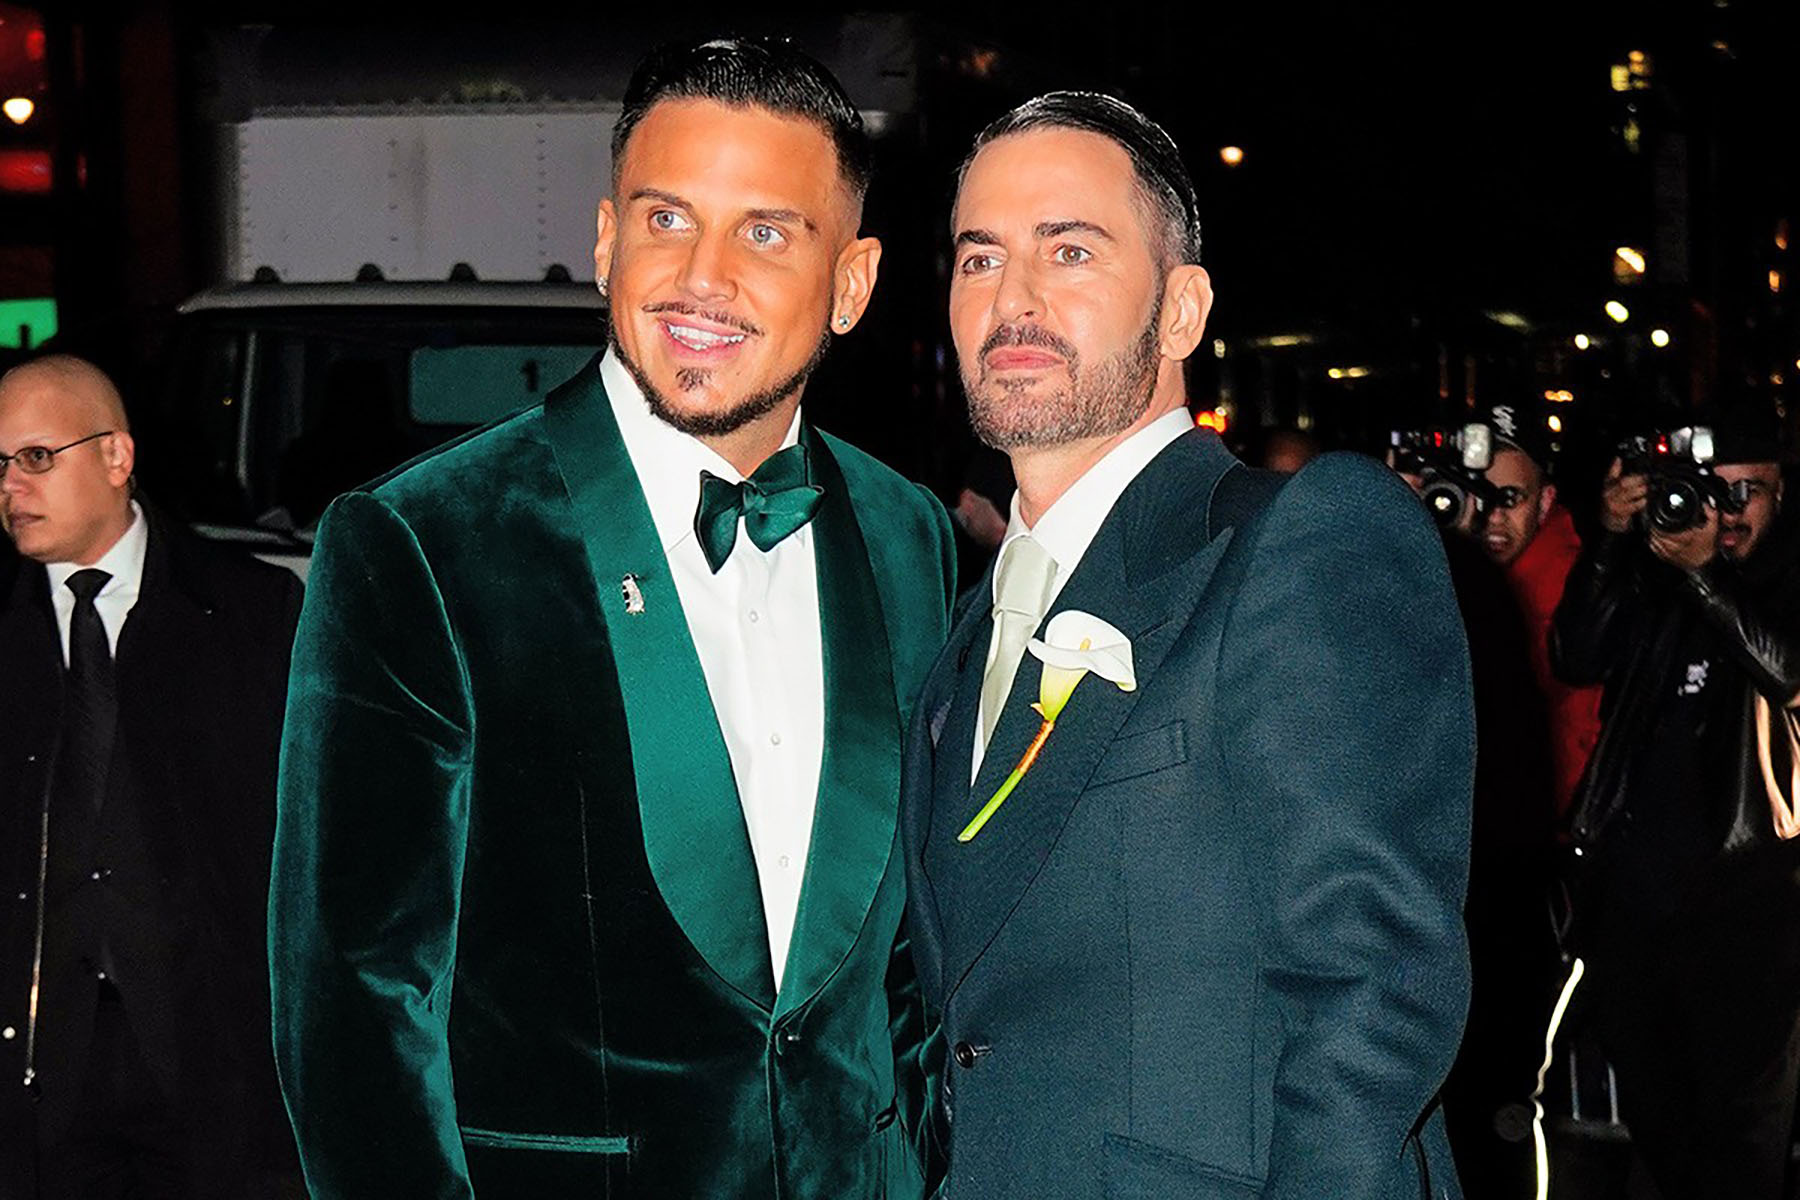 Marc Jacobs Proposes to Longterm Boyfriend by Way of Flashmob at